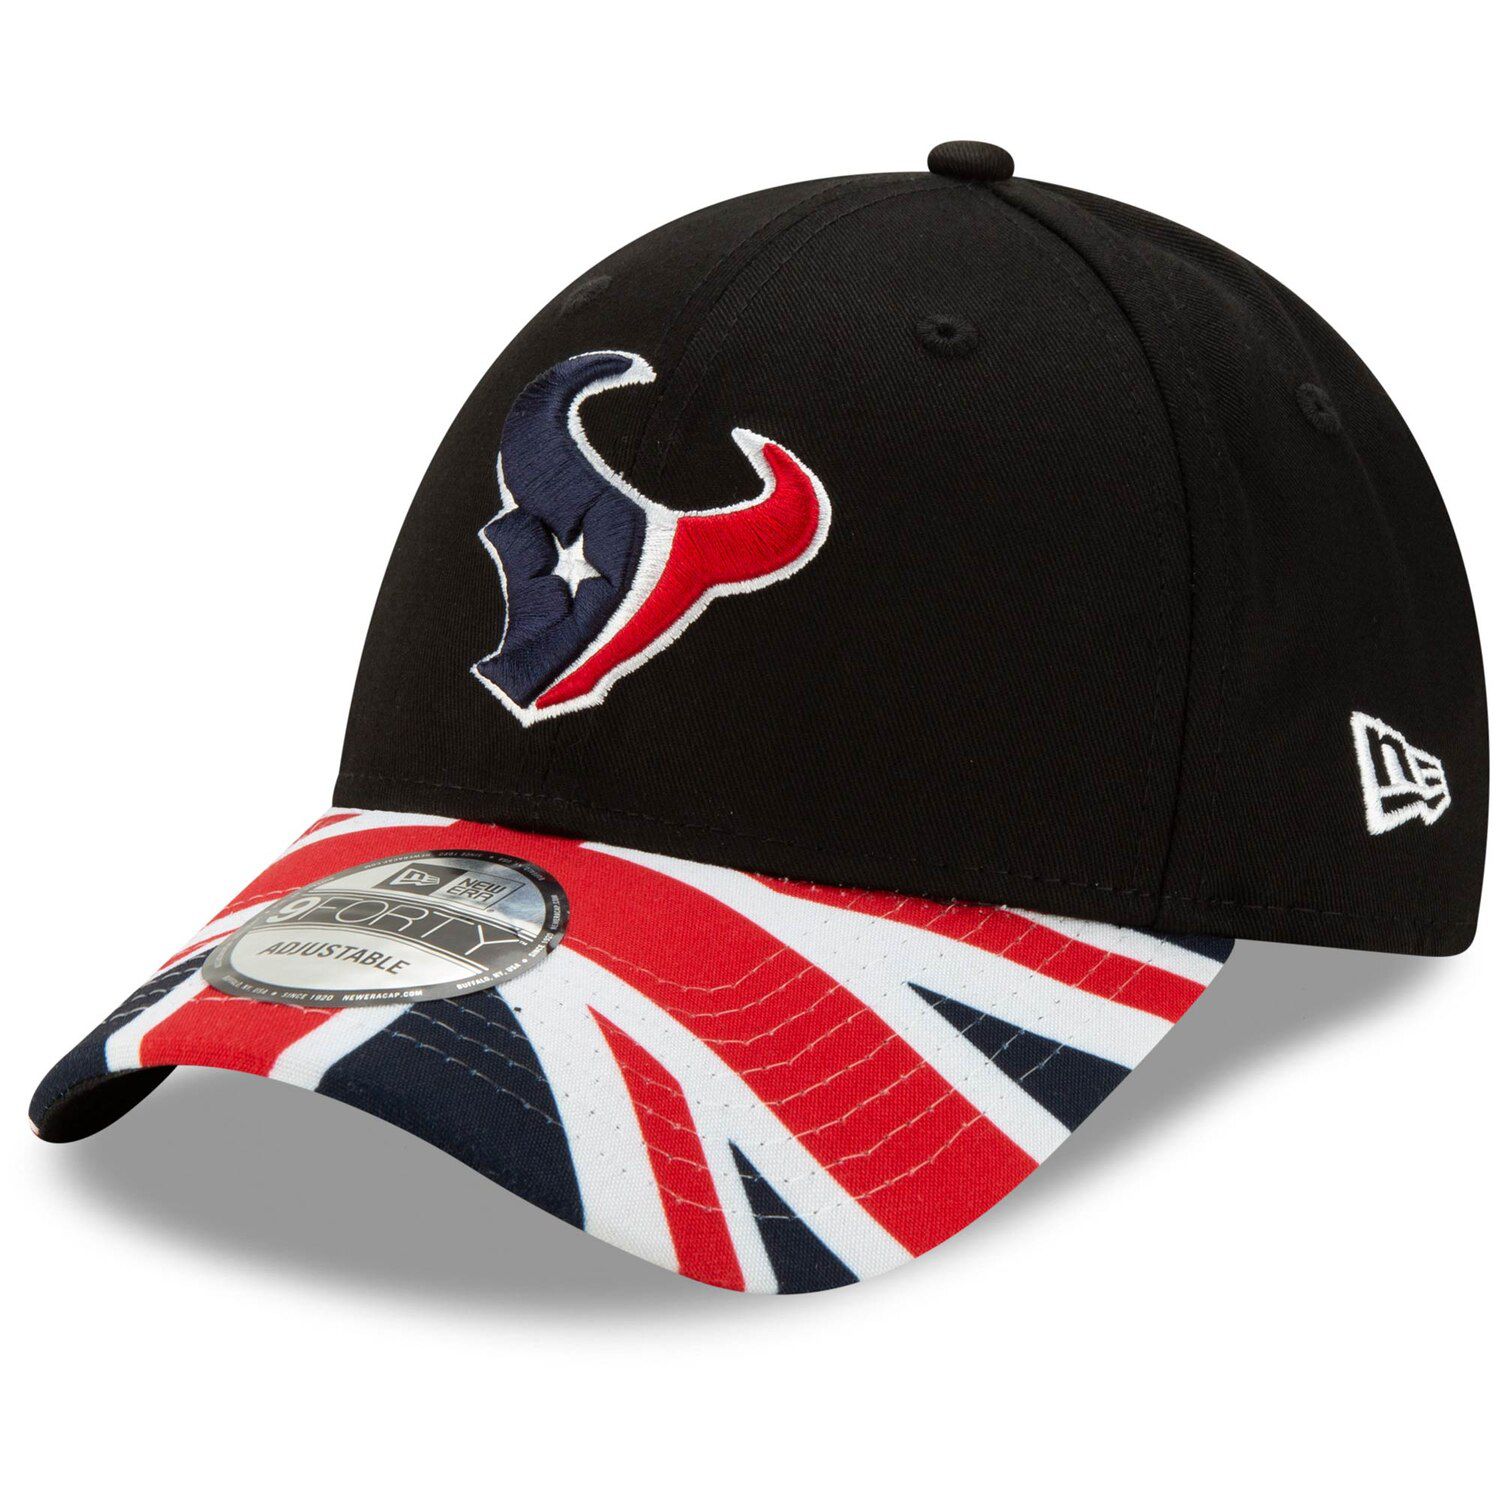 red texans hat